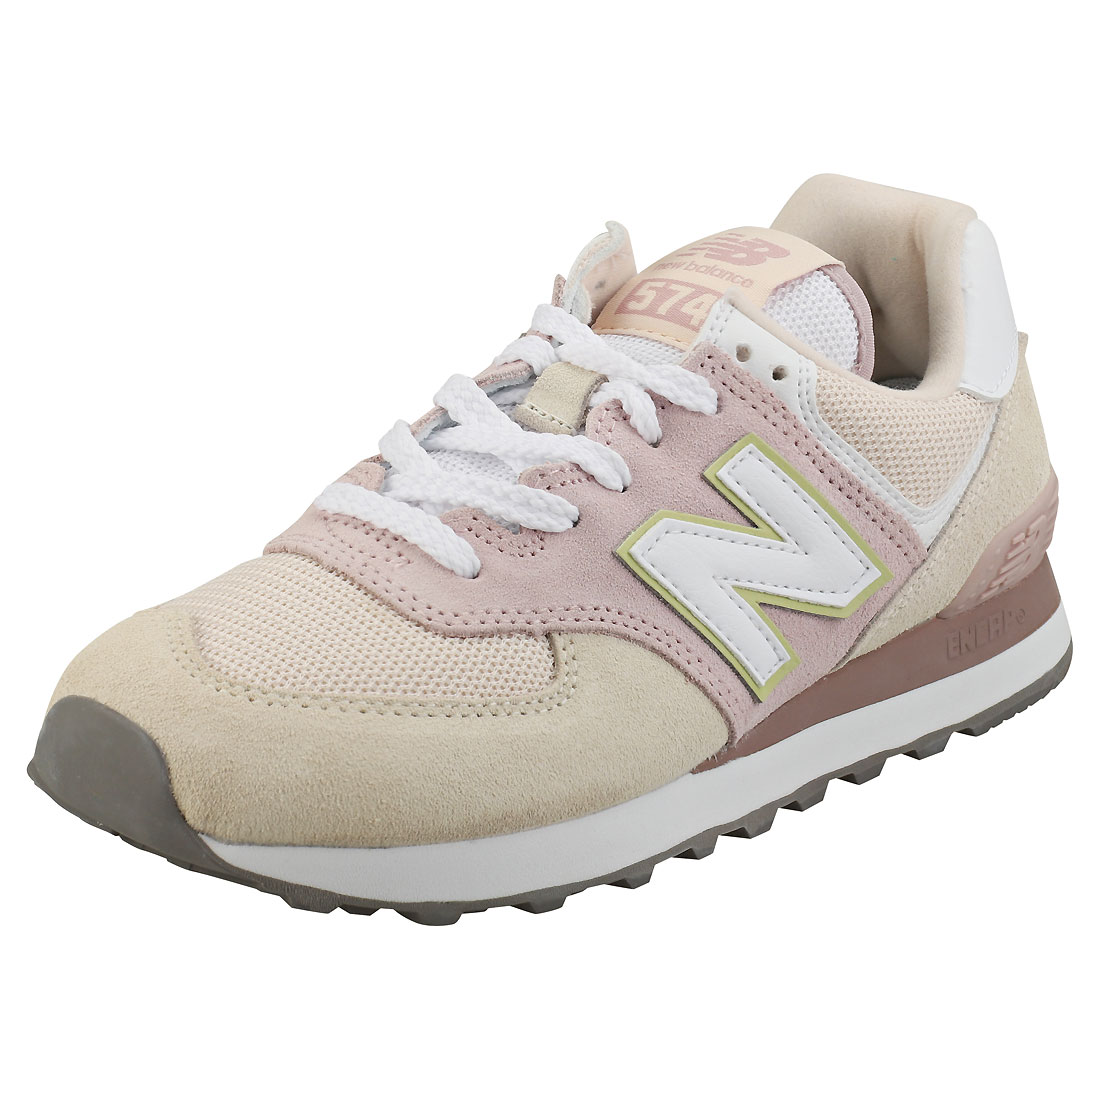 new balance pink 574 v2 suede trainers